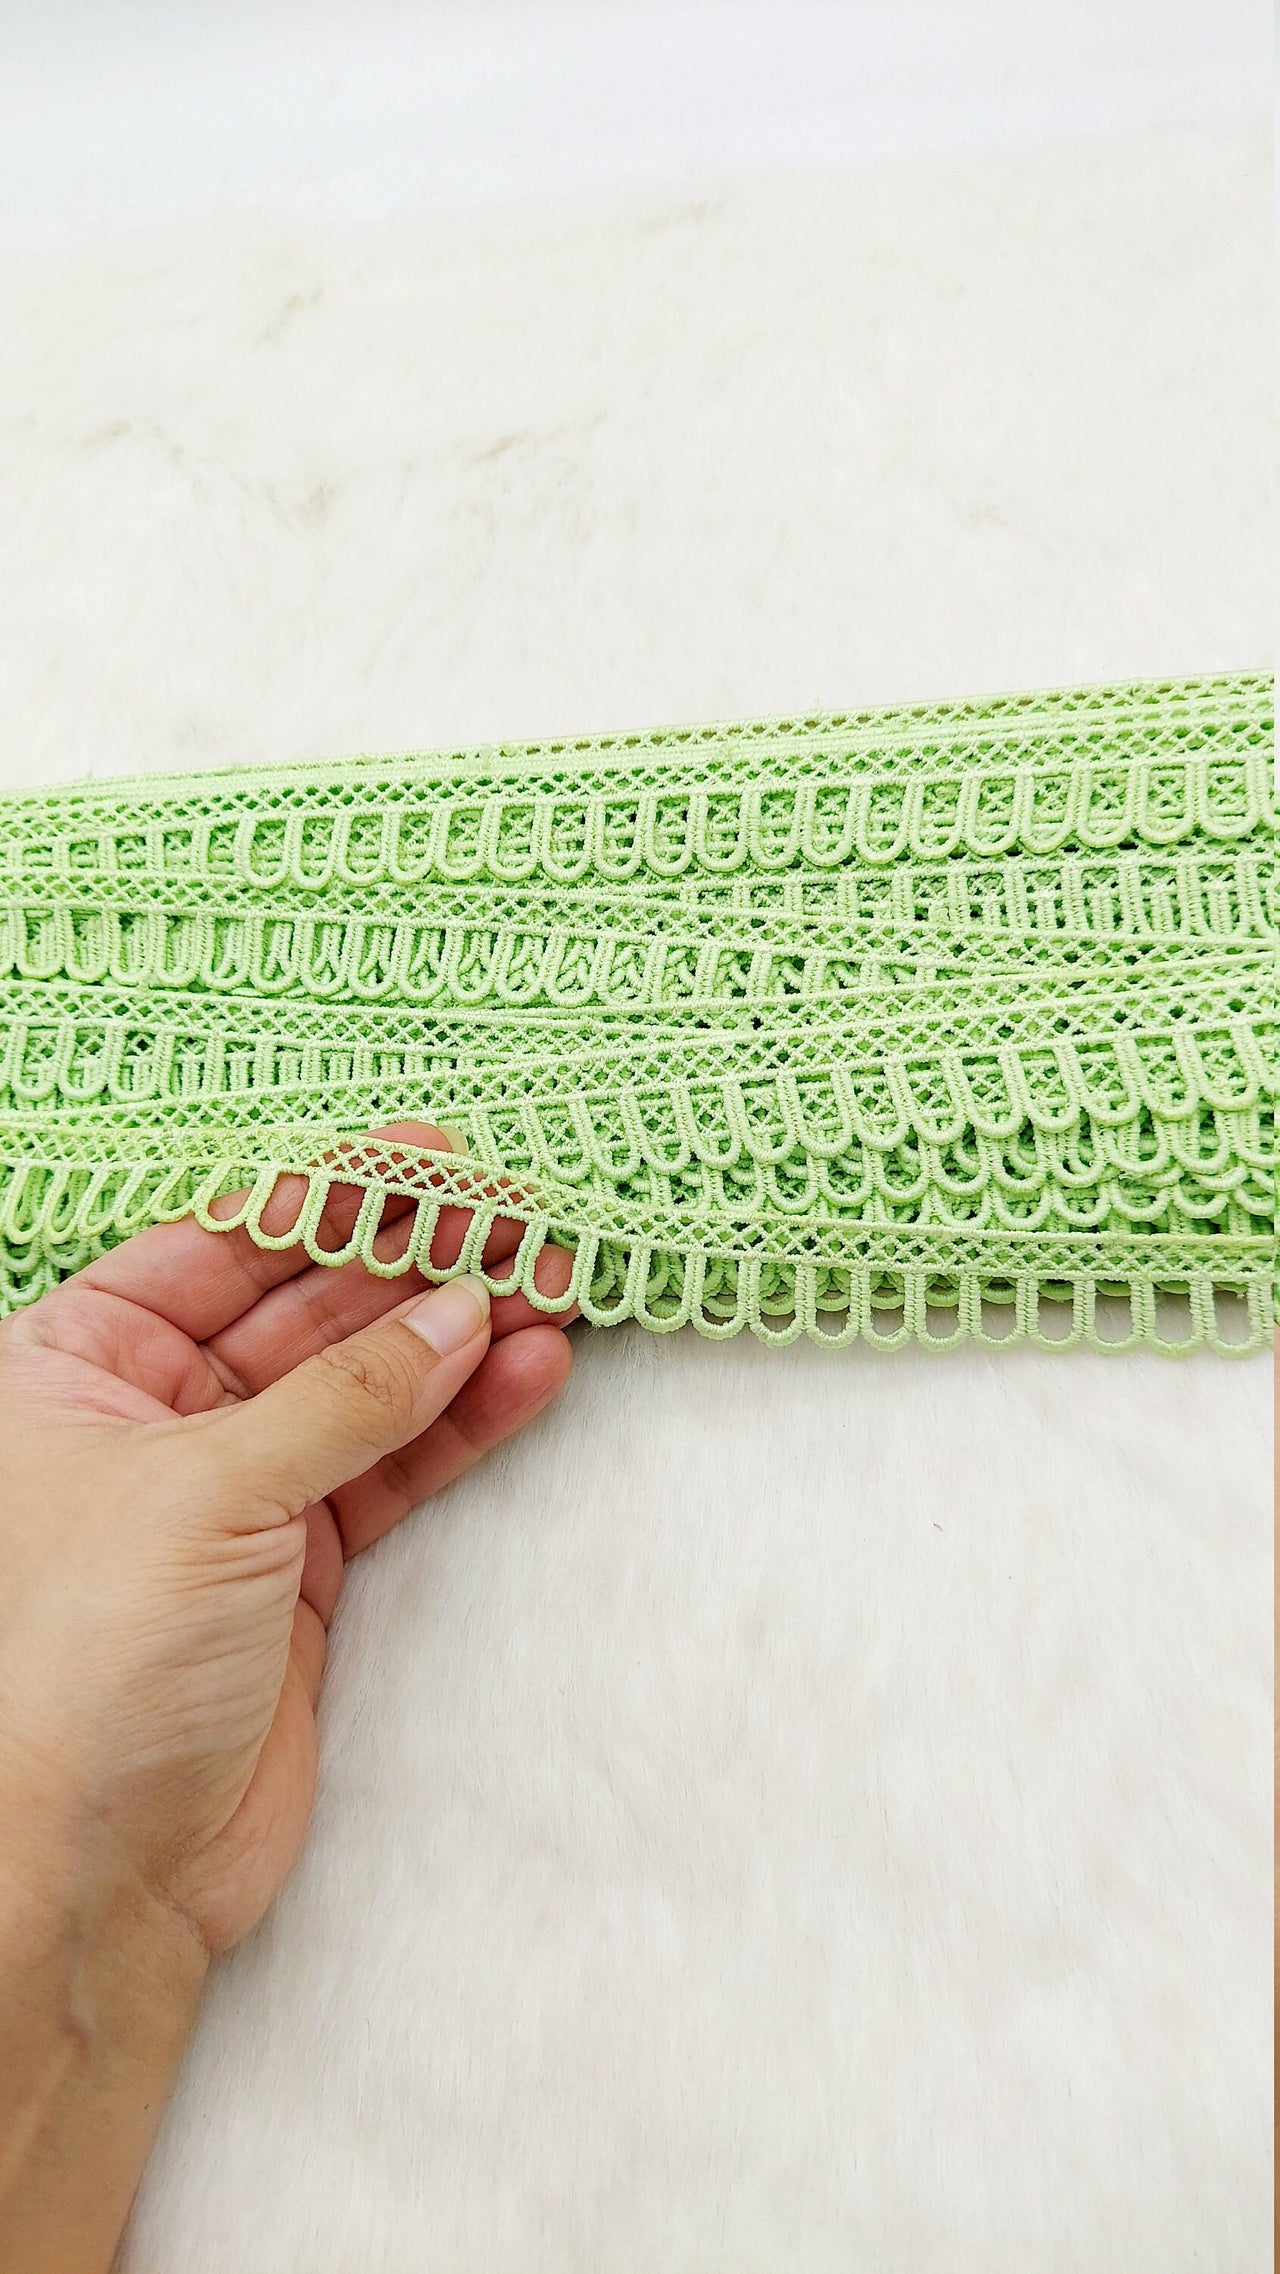 9 Yards Green Embroidery Cotton Lace Trim, Approx. 20mm Wide, Fringe Trim